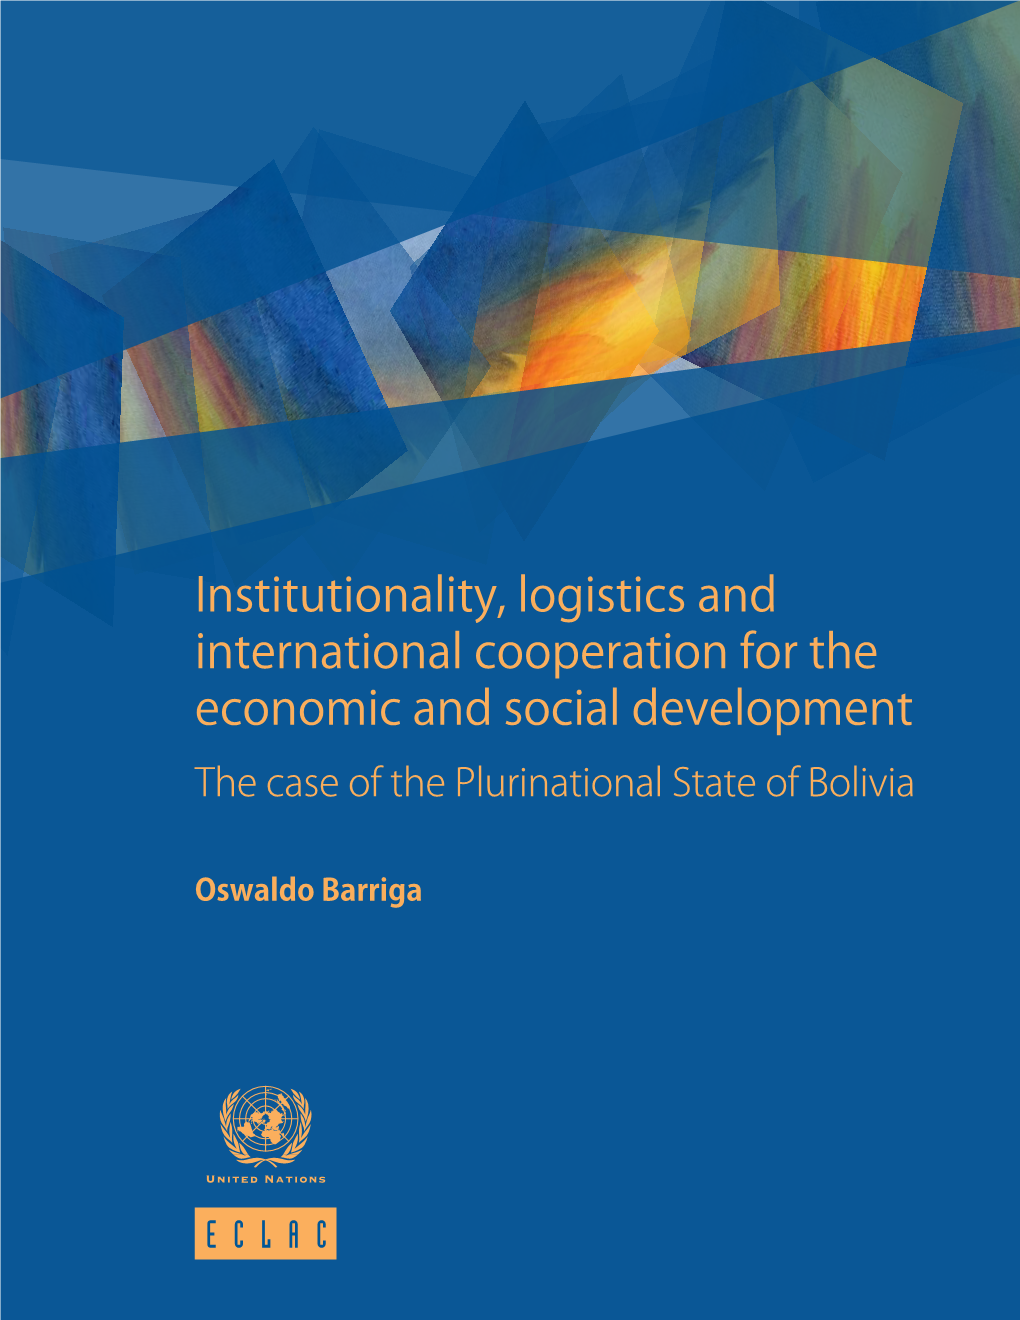 Institutionality, Logistics and International Cooperation for the Economic and Social Development the Case of the Plurinational State of Bolivia